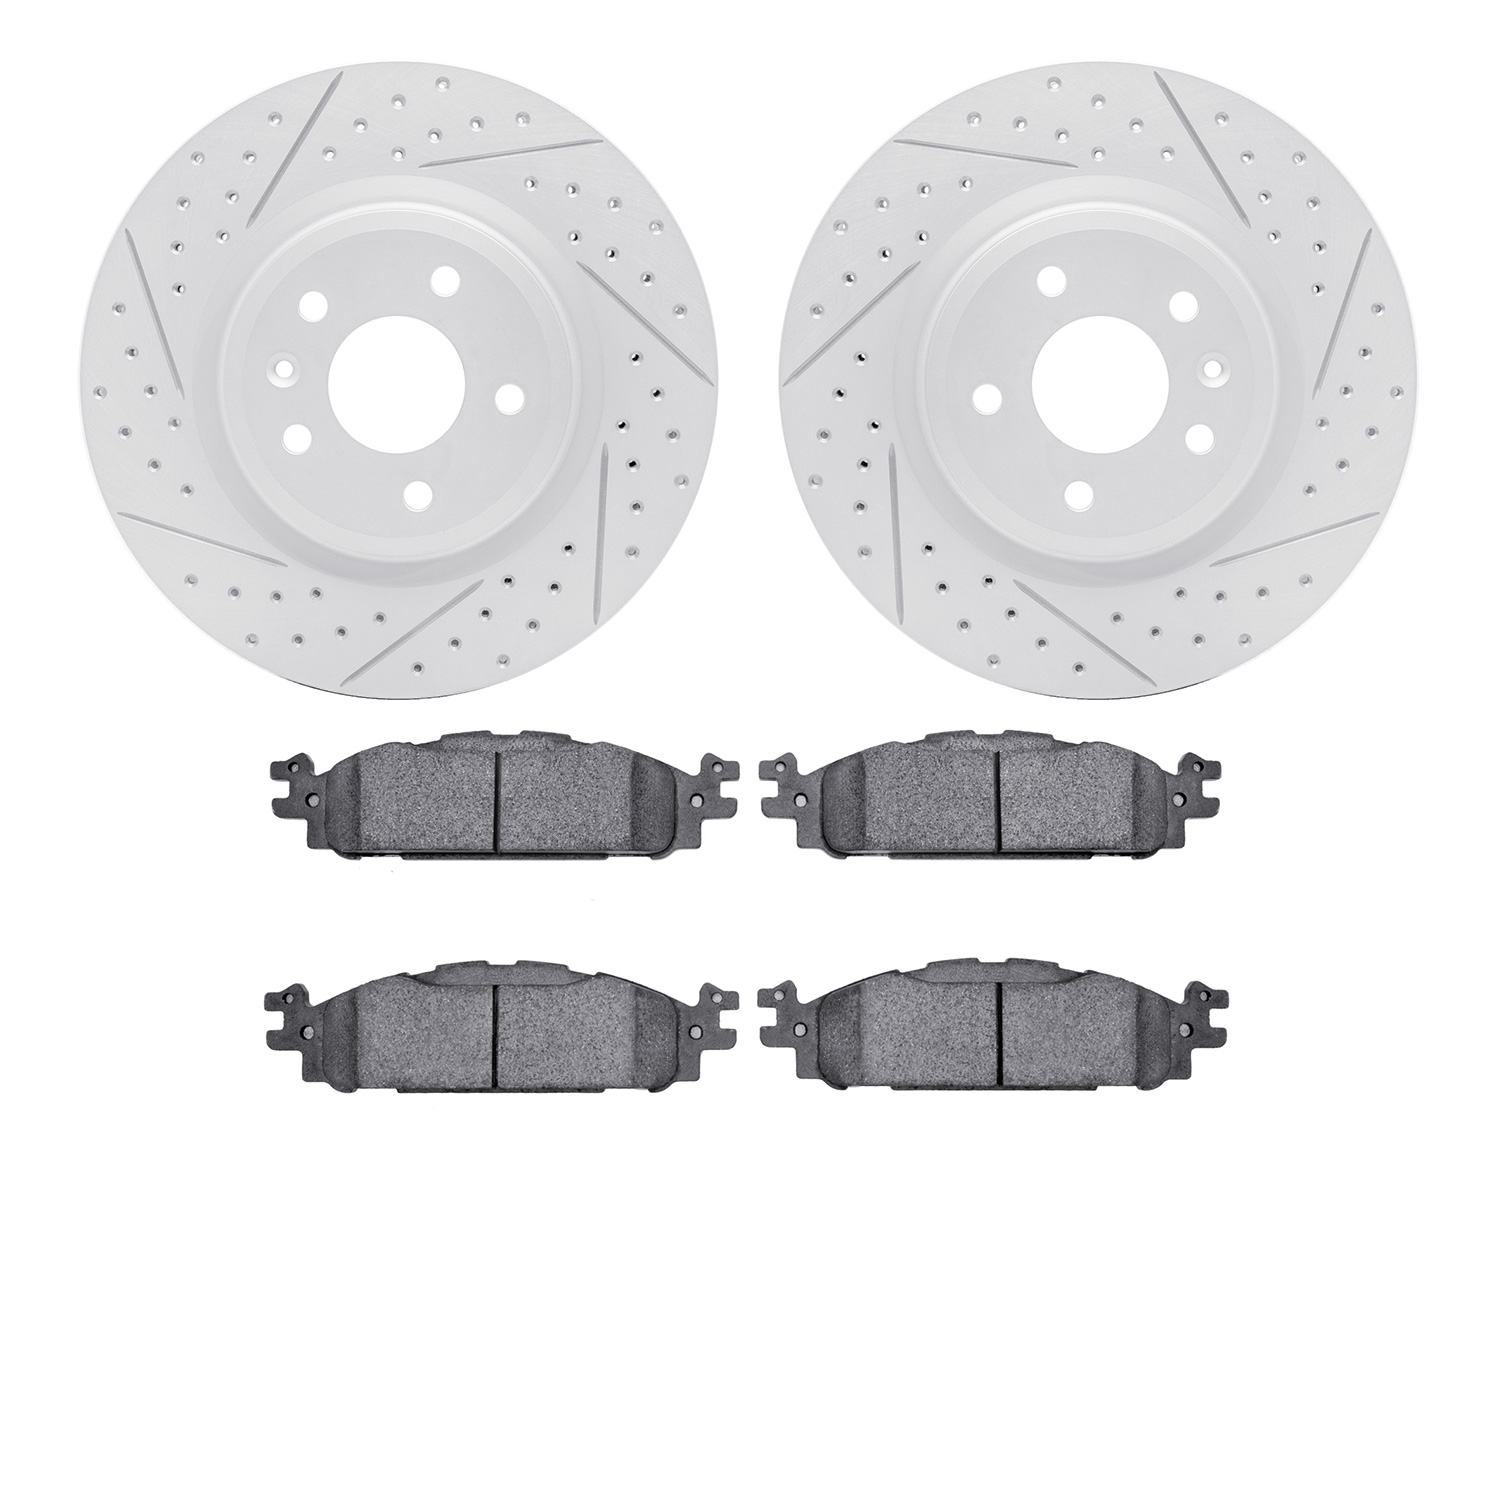 2202-54002 Geoperformance Drilled/Slotted Rotors w/Heavy-Duty Pads Kit, 2009-2010 Ford/Lincoln/Mercury/Mazda, Position: Front